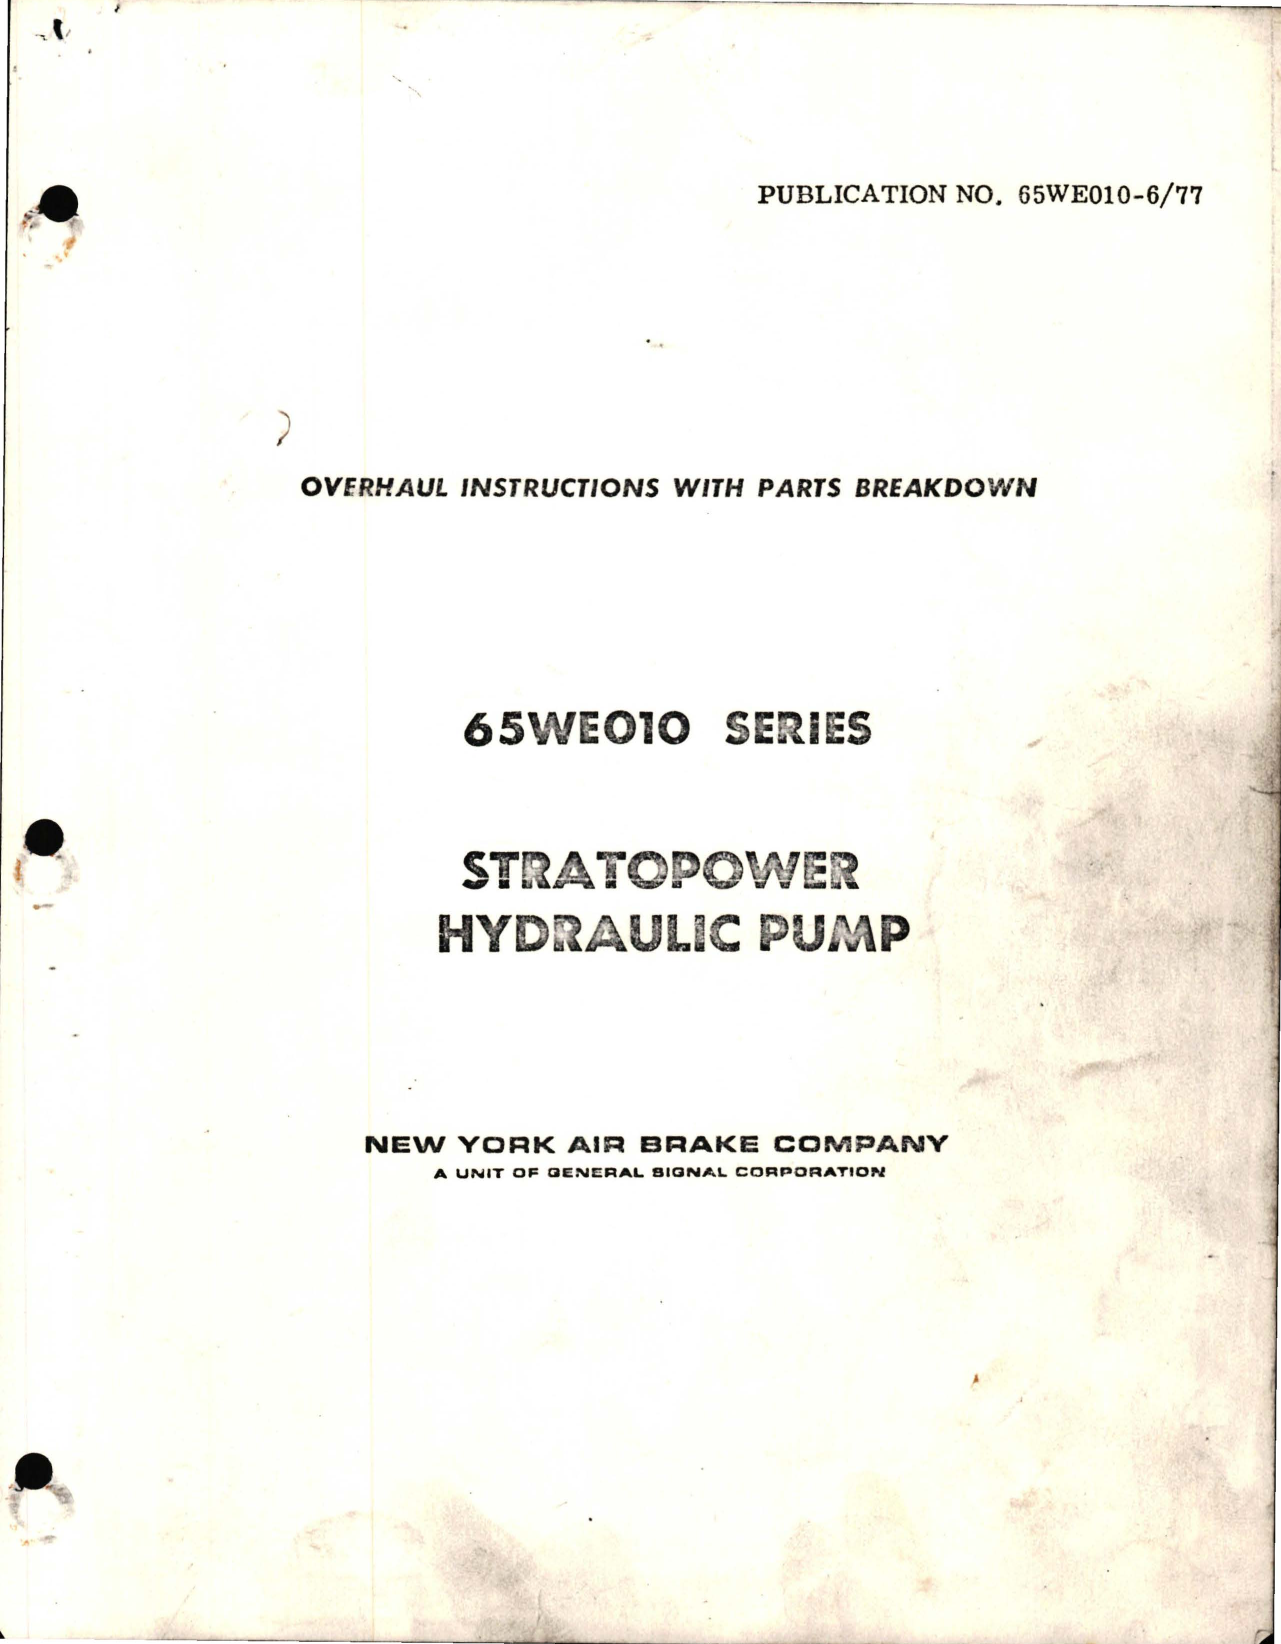 Sample page 1 from AirCorps Library document: Overhaul Instructions with Parts Breakdown for Stratopower Hydraulic Pump - 65WE010 Series 